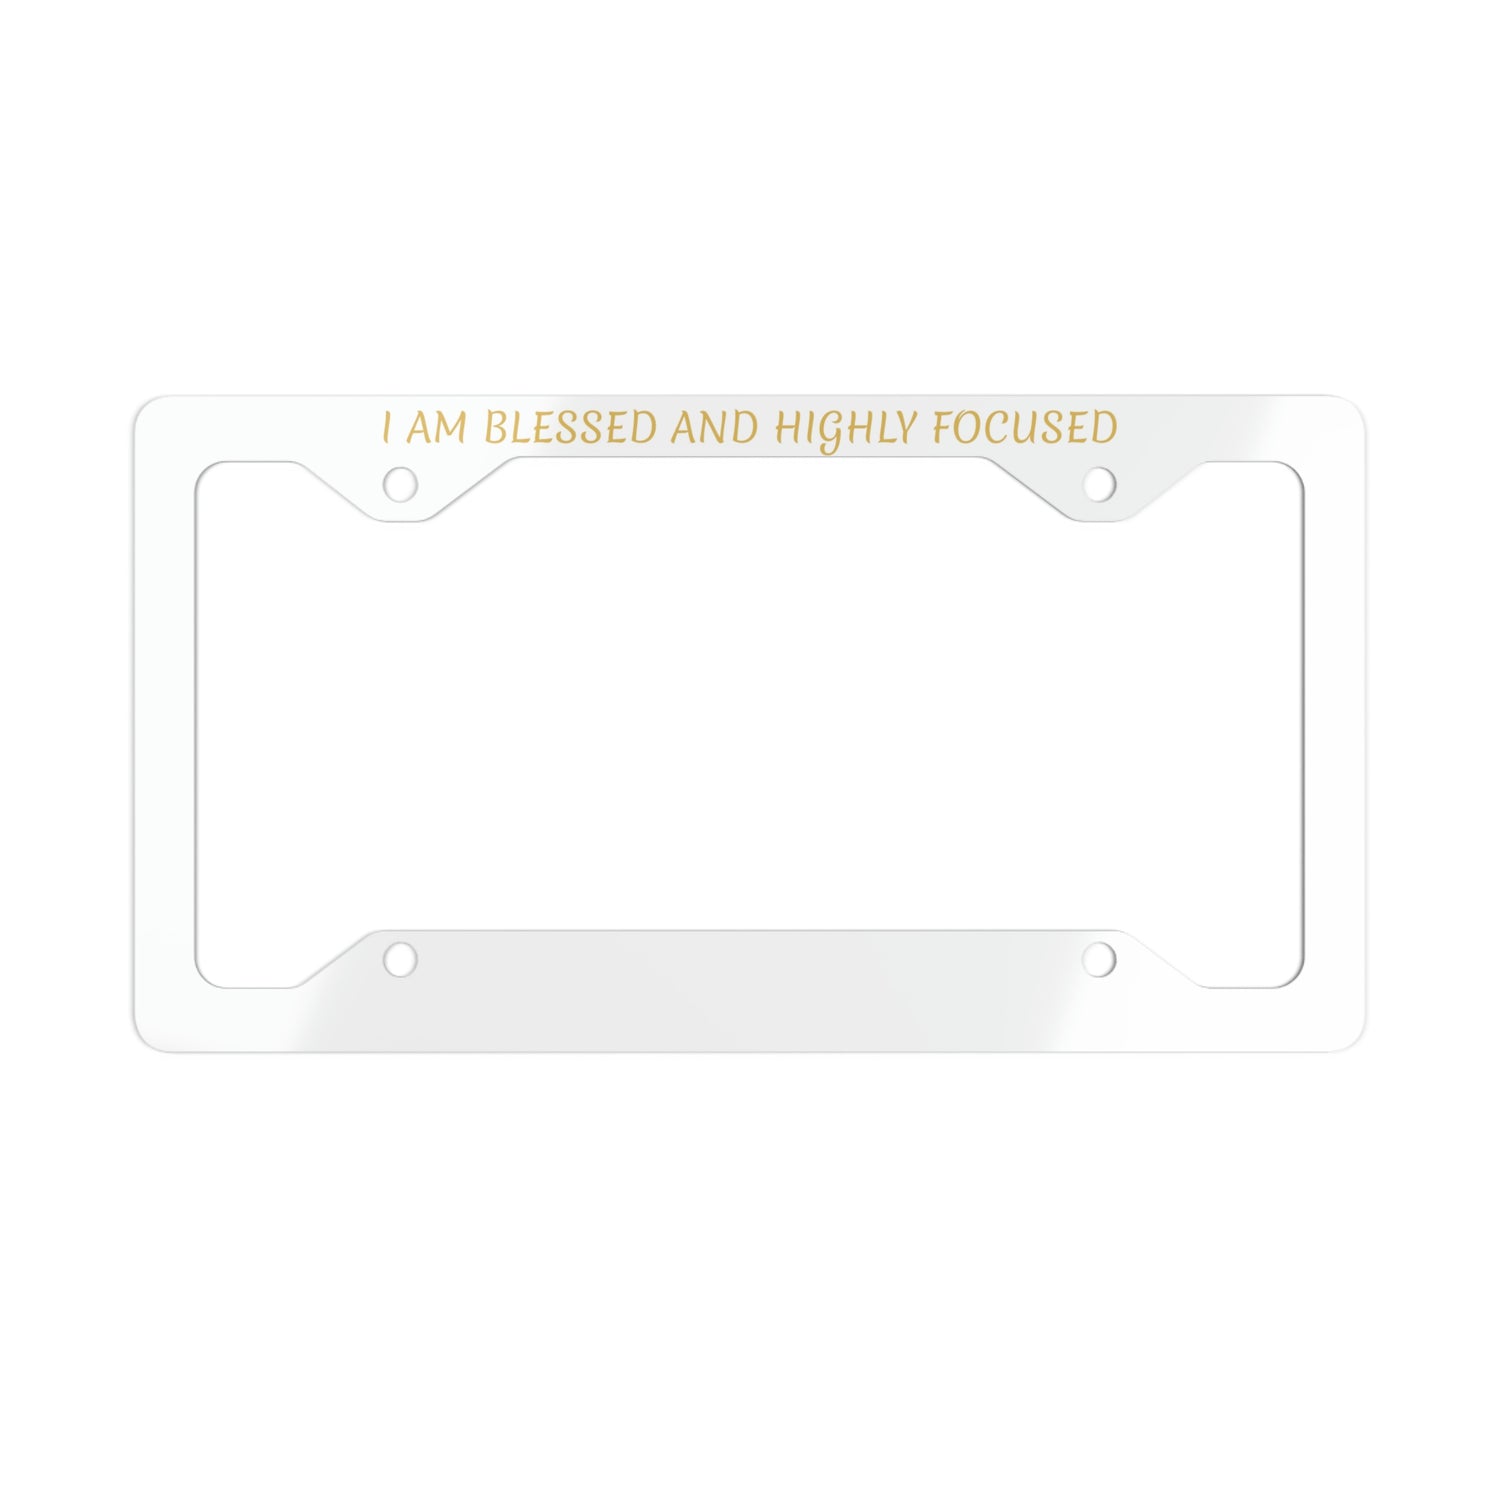 I AM BLESSED AND HIGHLY FOCUSED - Metal License Plate Frame